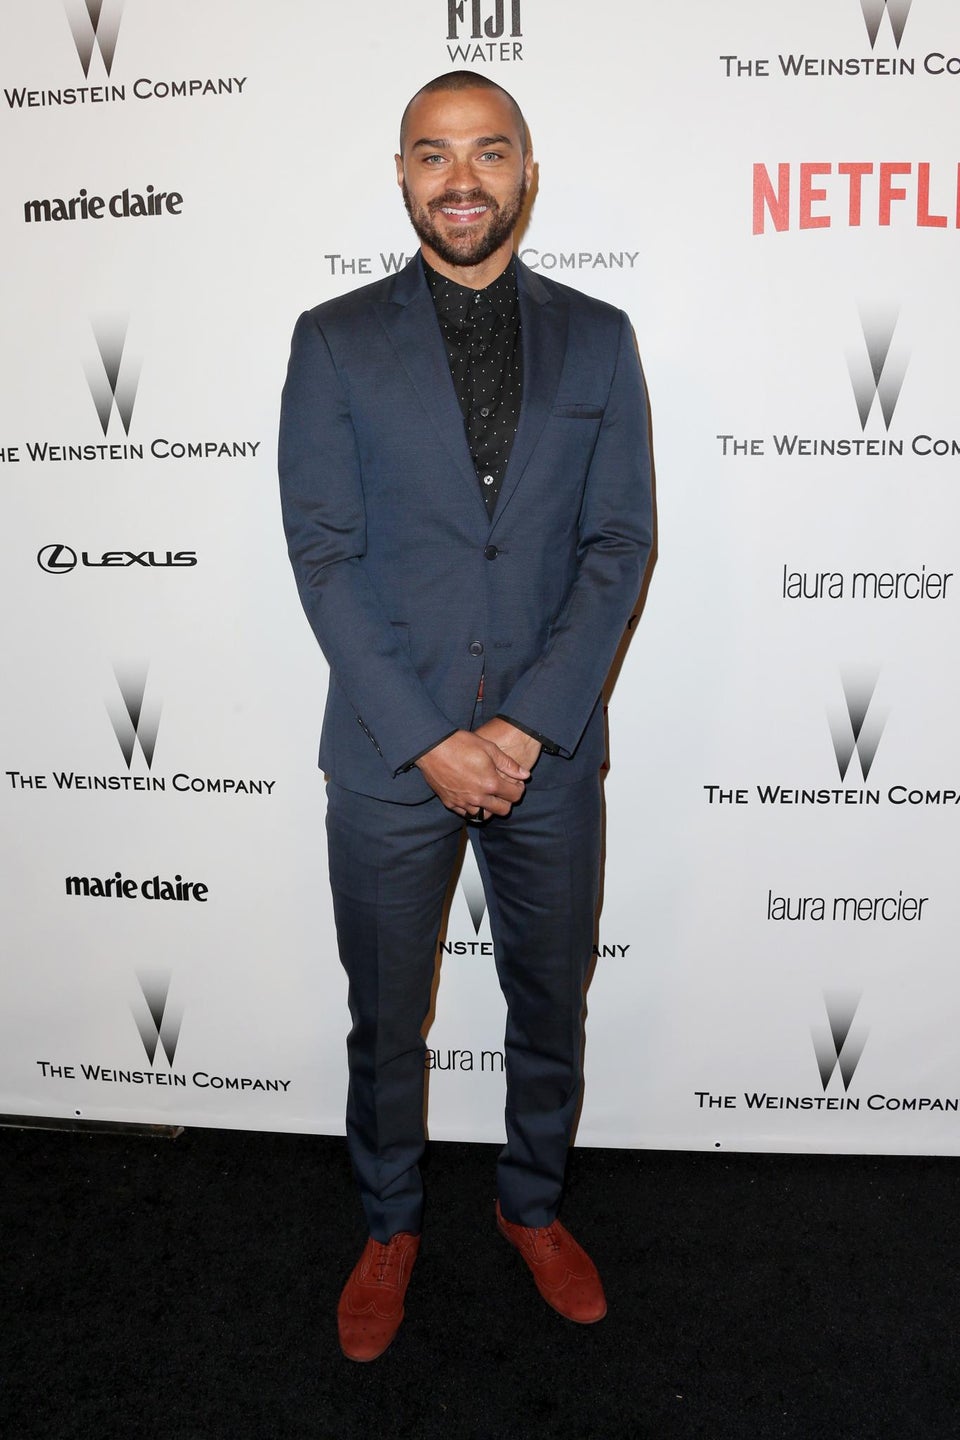 Jesse Williams Dishes On Going From High School (Teacher) to Hollywood, #BlackLivesMatter & More